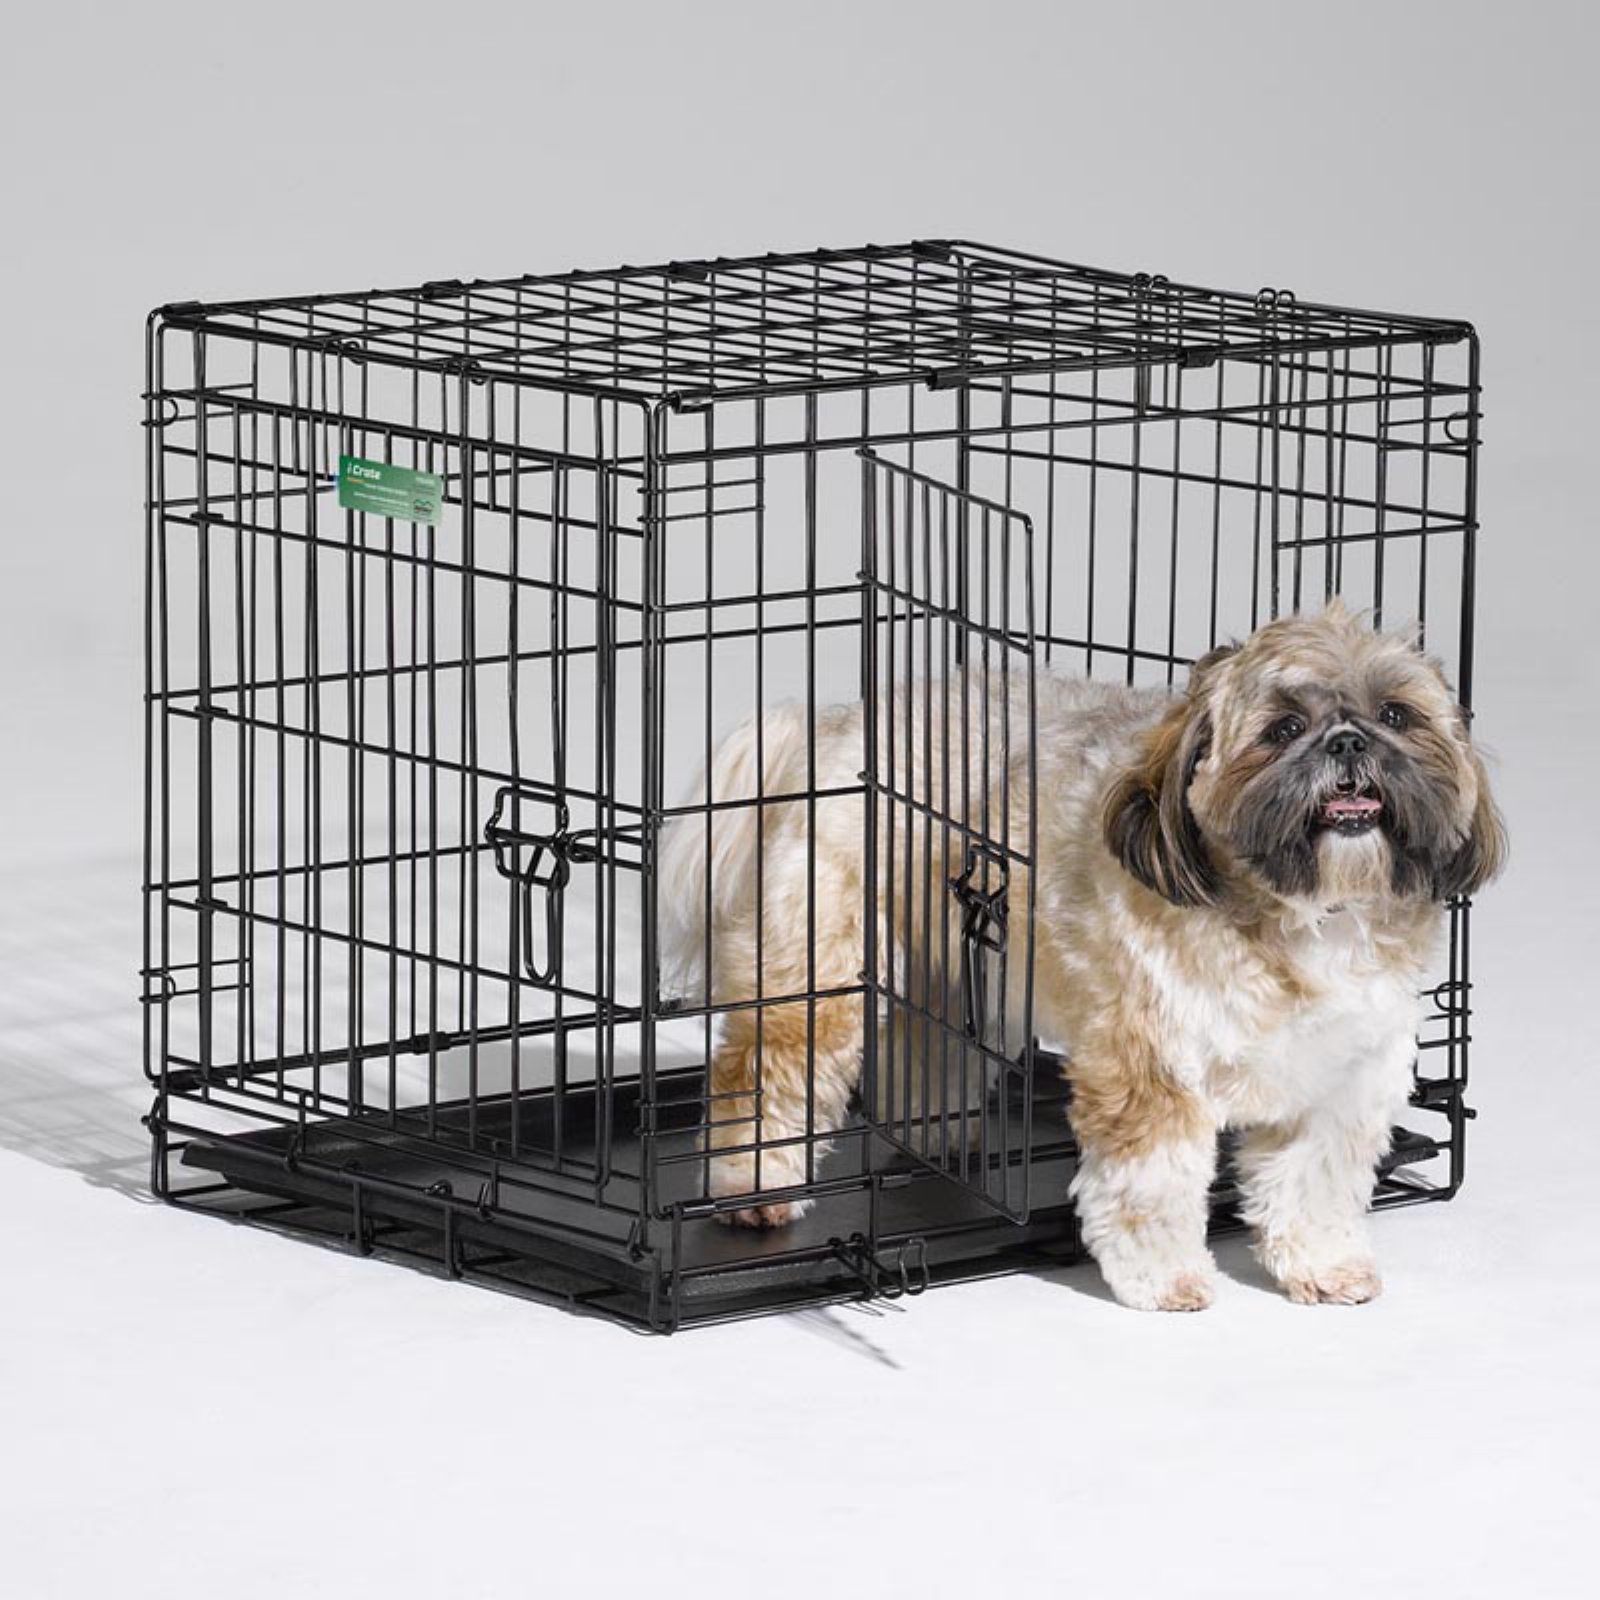 MidWest Homes For Pets Double Door iCrate Metal Dog Crate, 36" - image 3 of 10